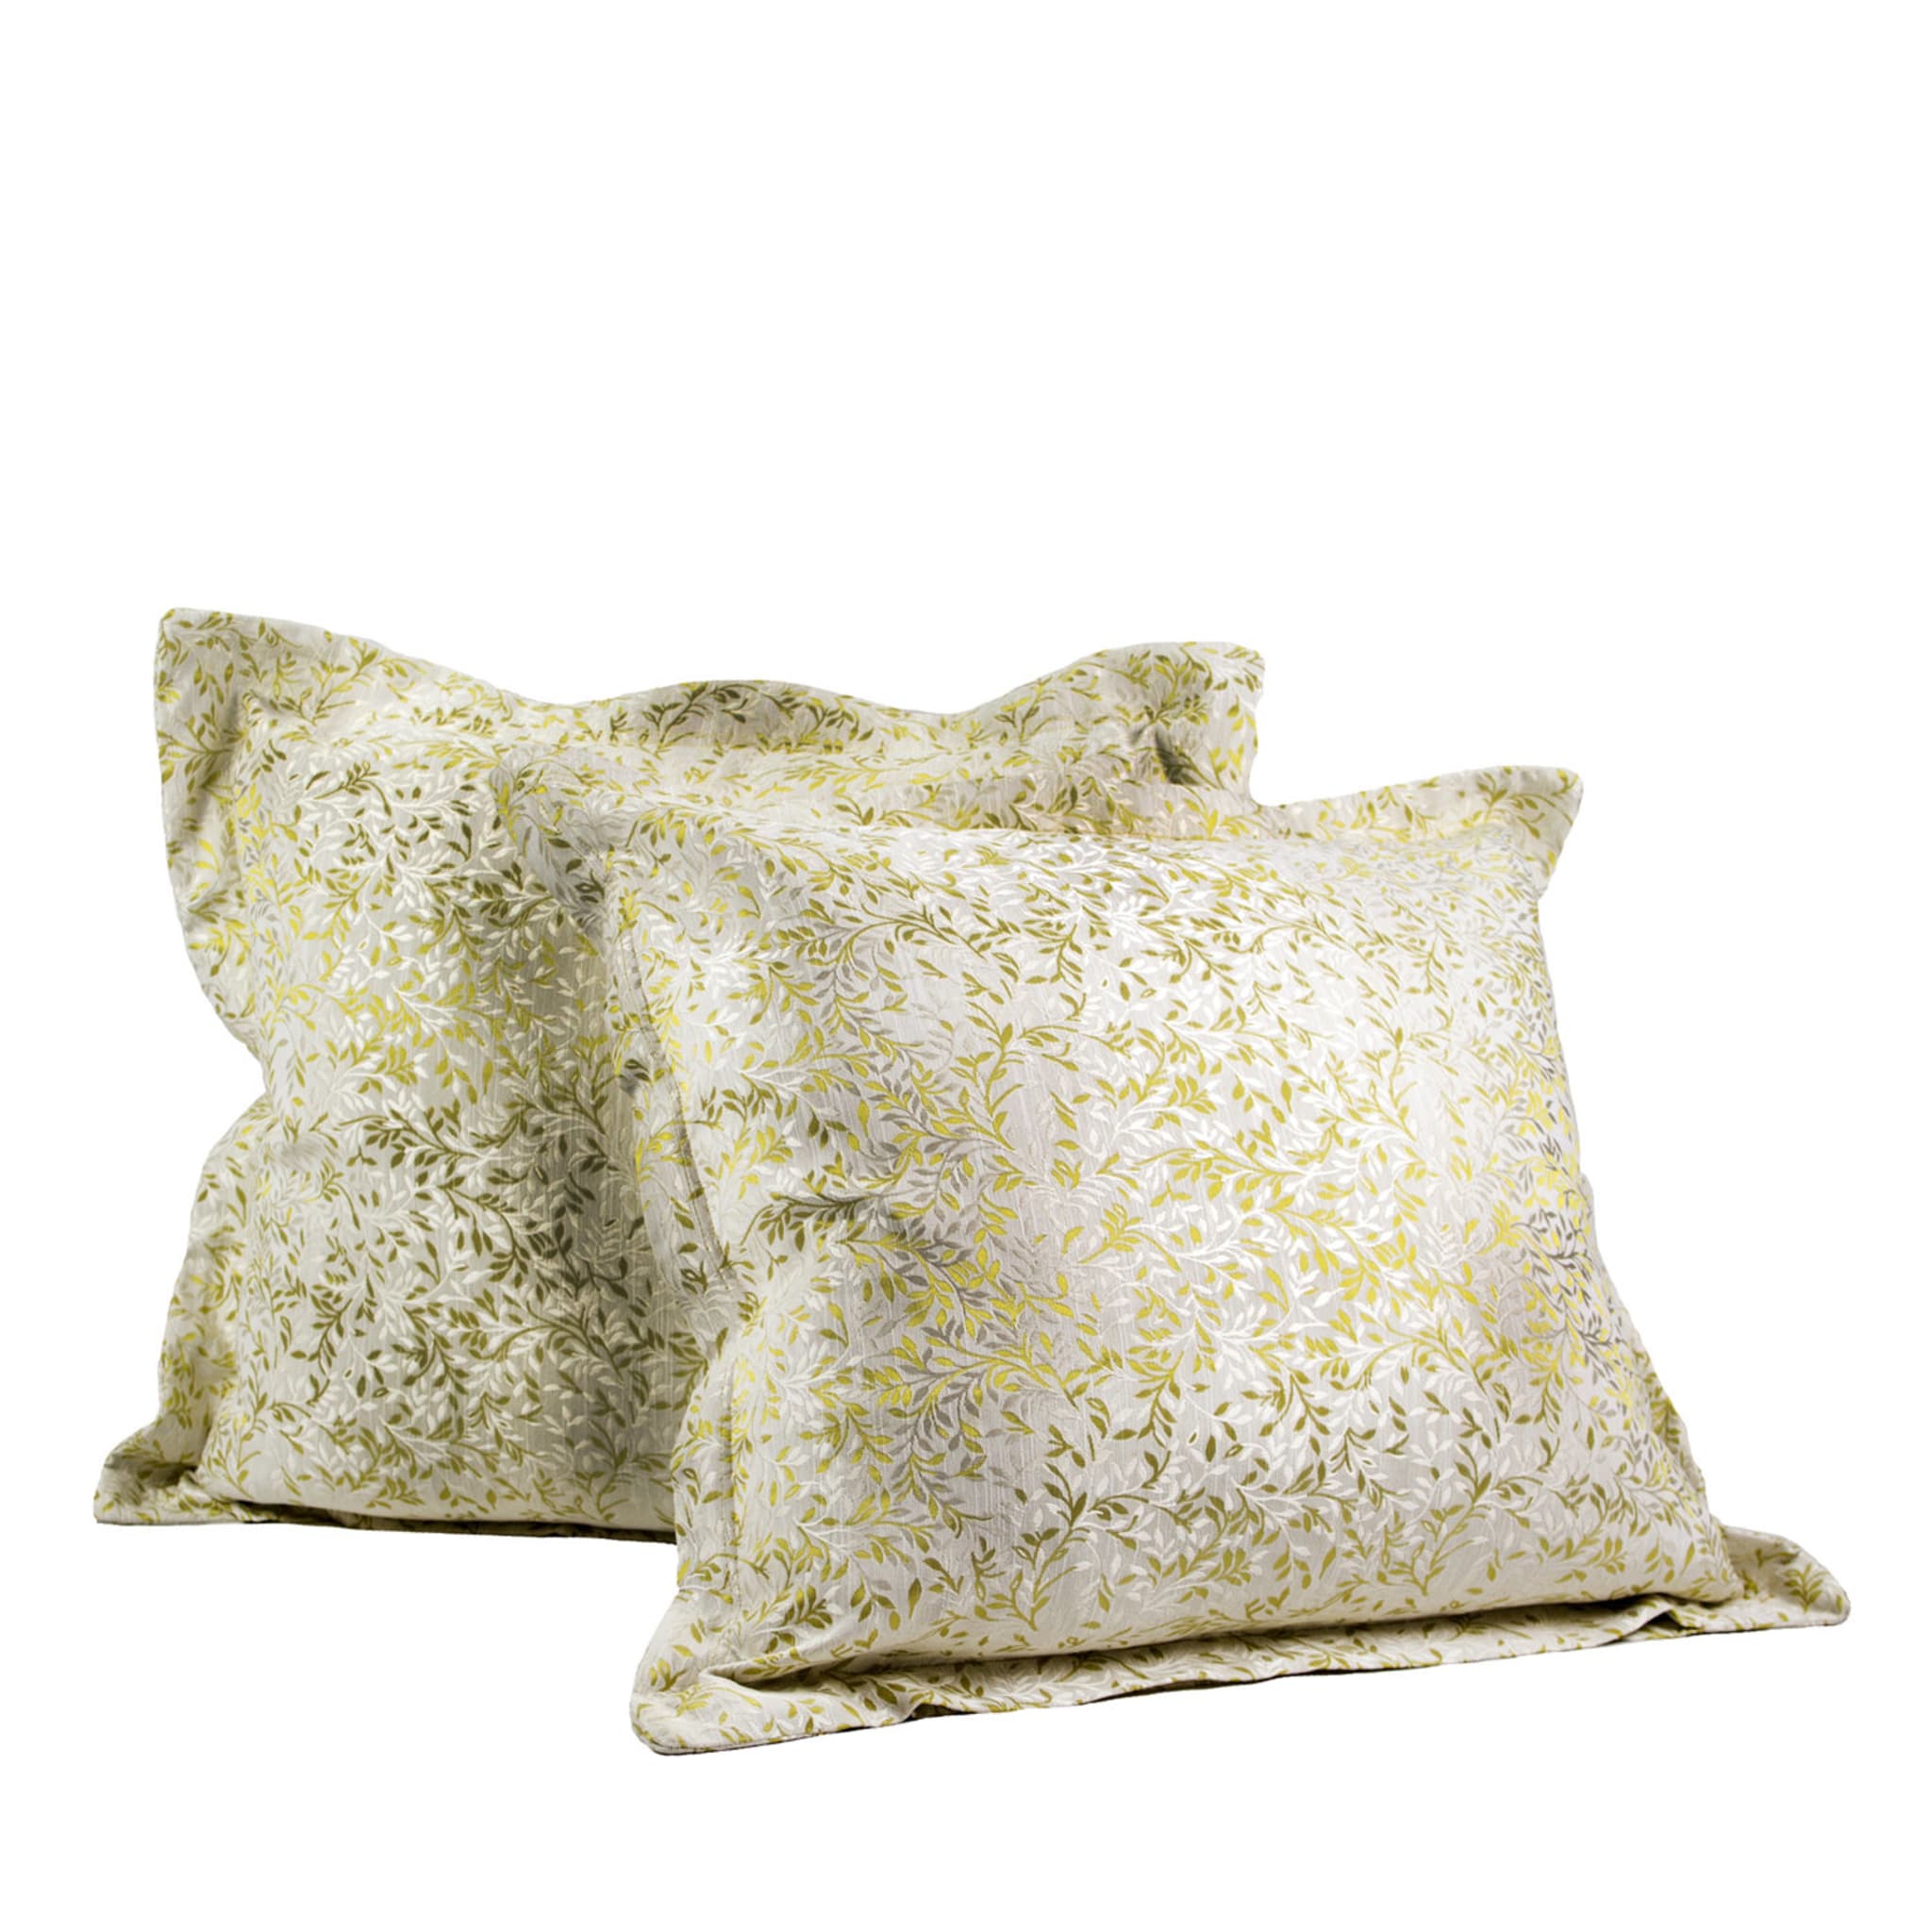 Set of 2 White and Gold Throw Cushions  - Main view